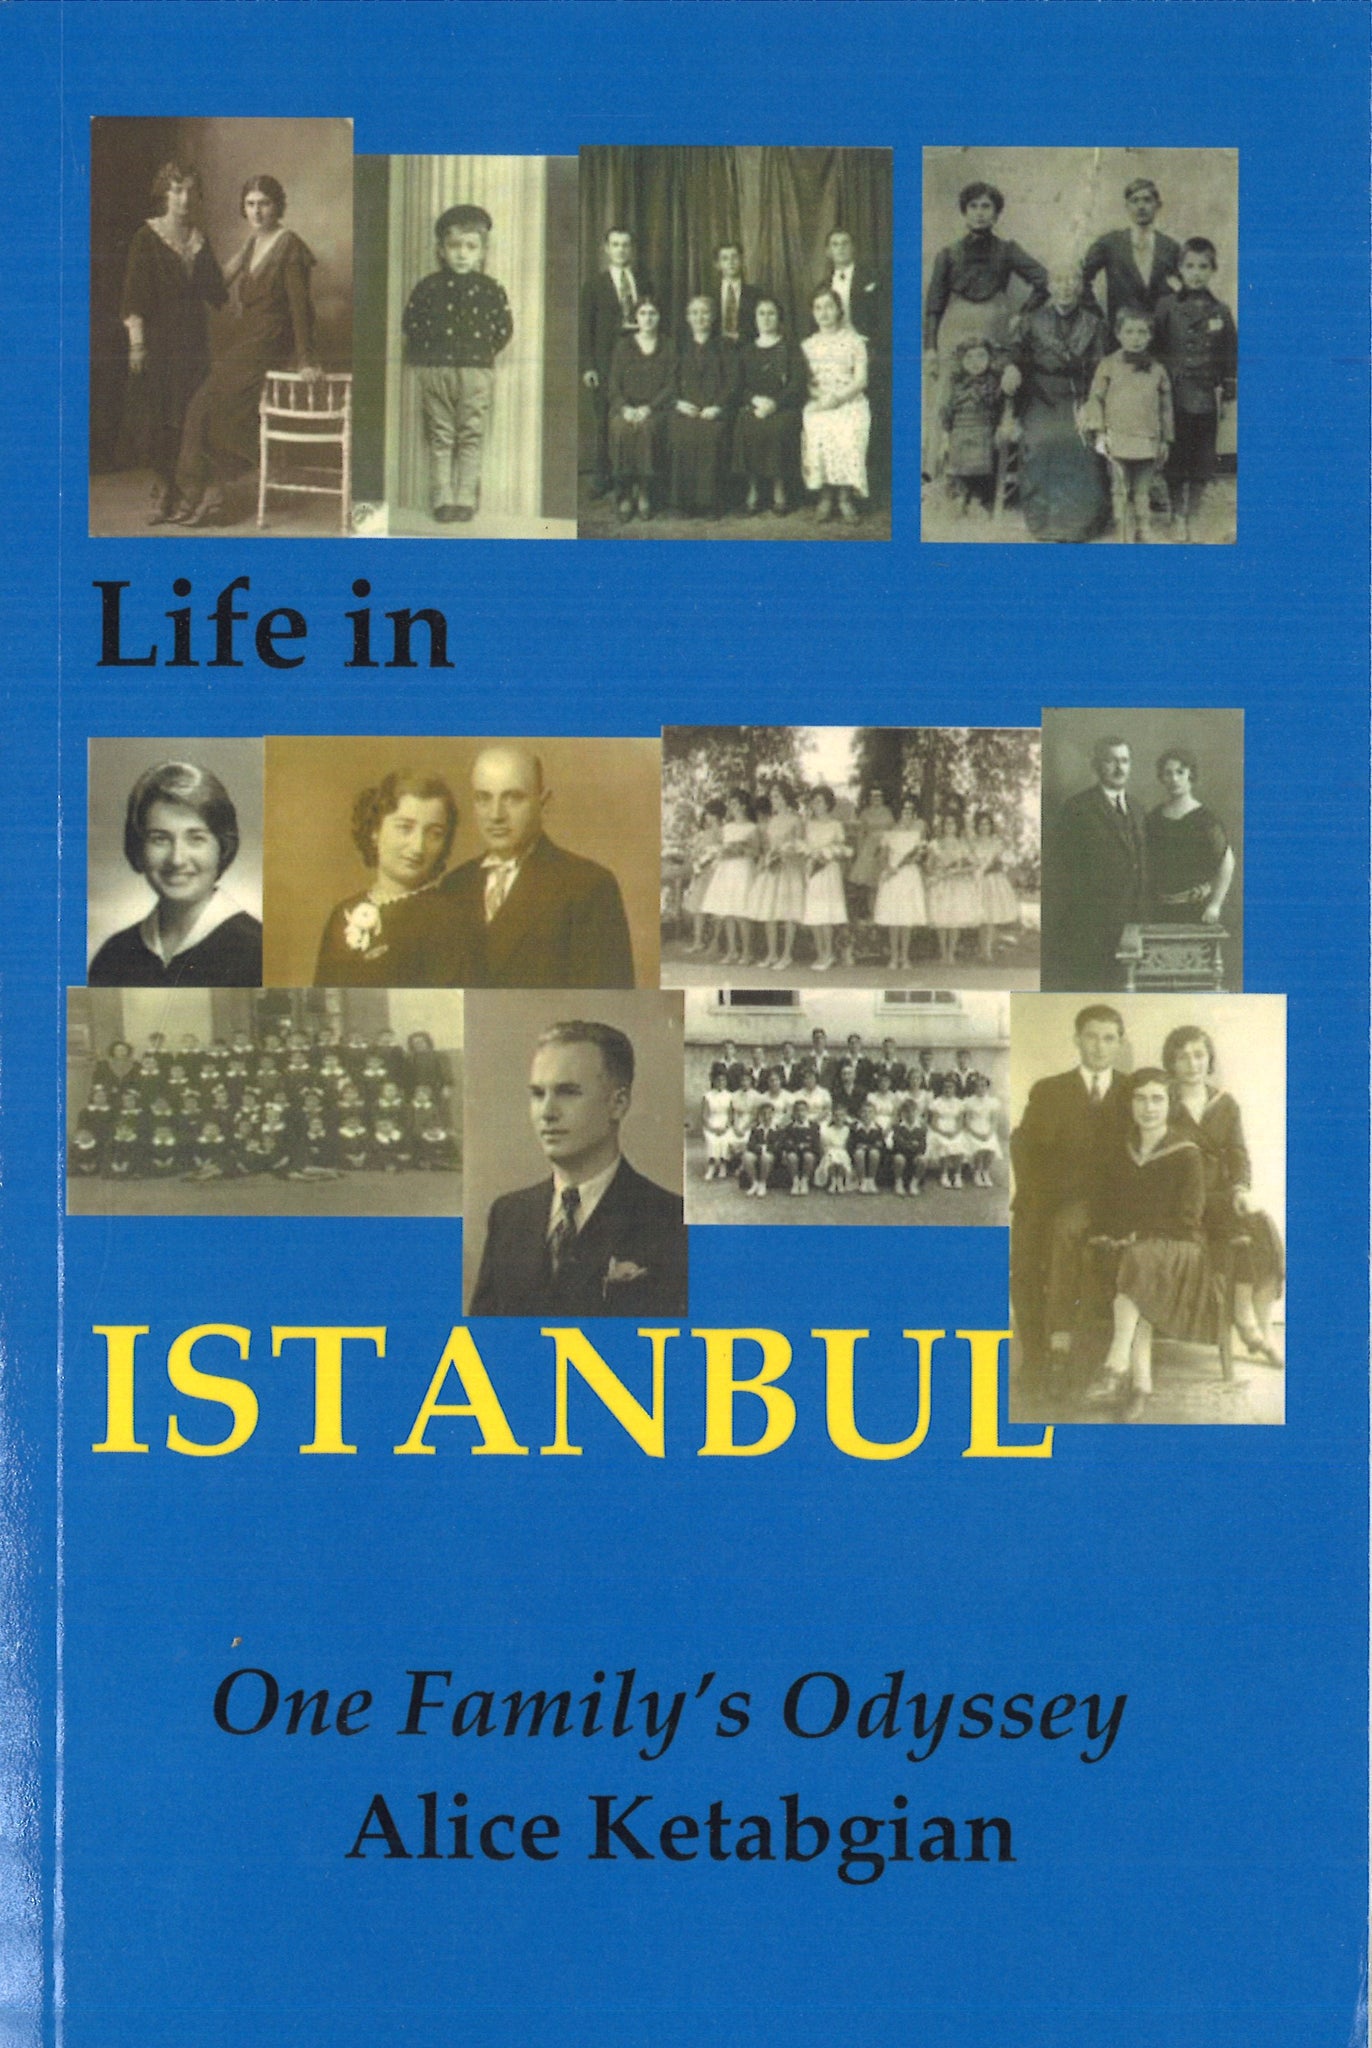 LIFE IN ISTANBUL: One Family's Odyssey